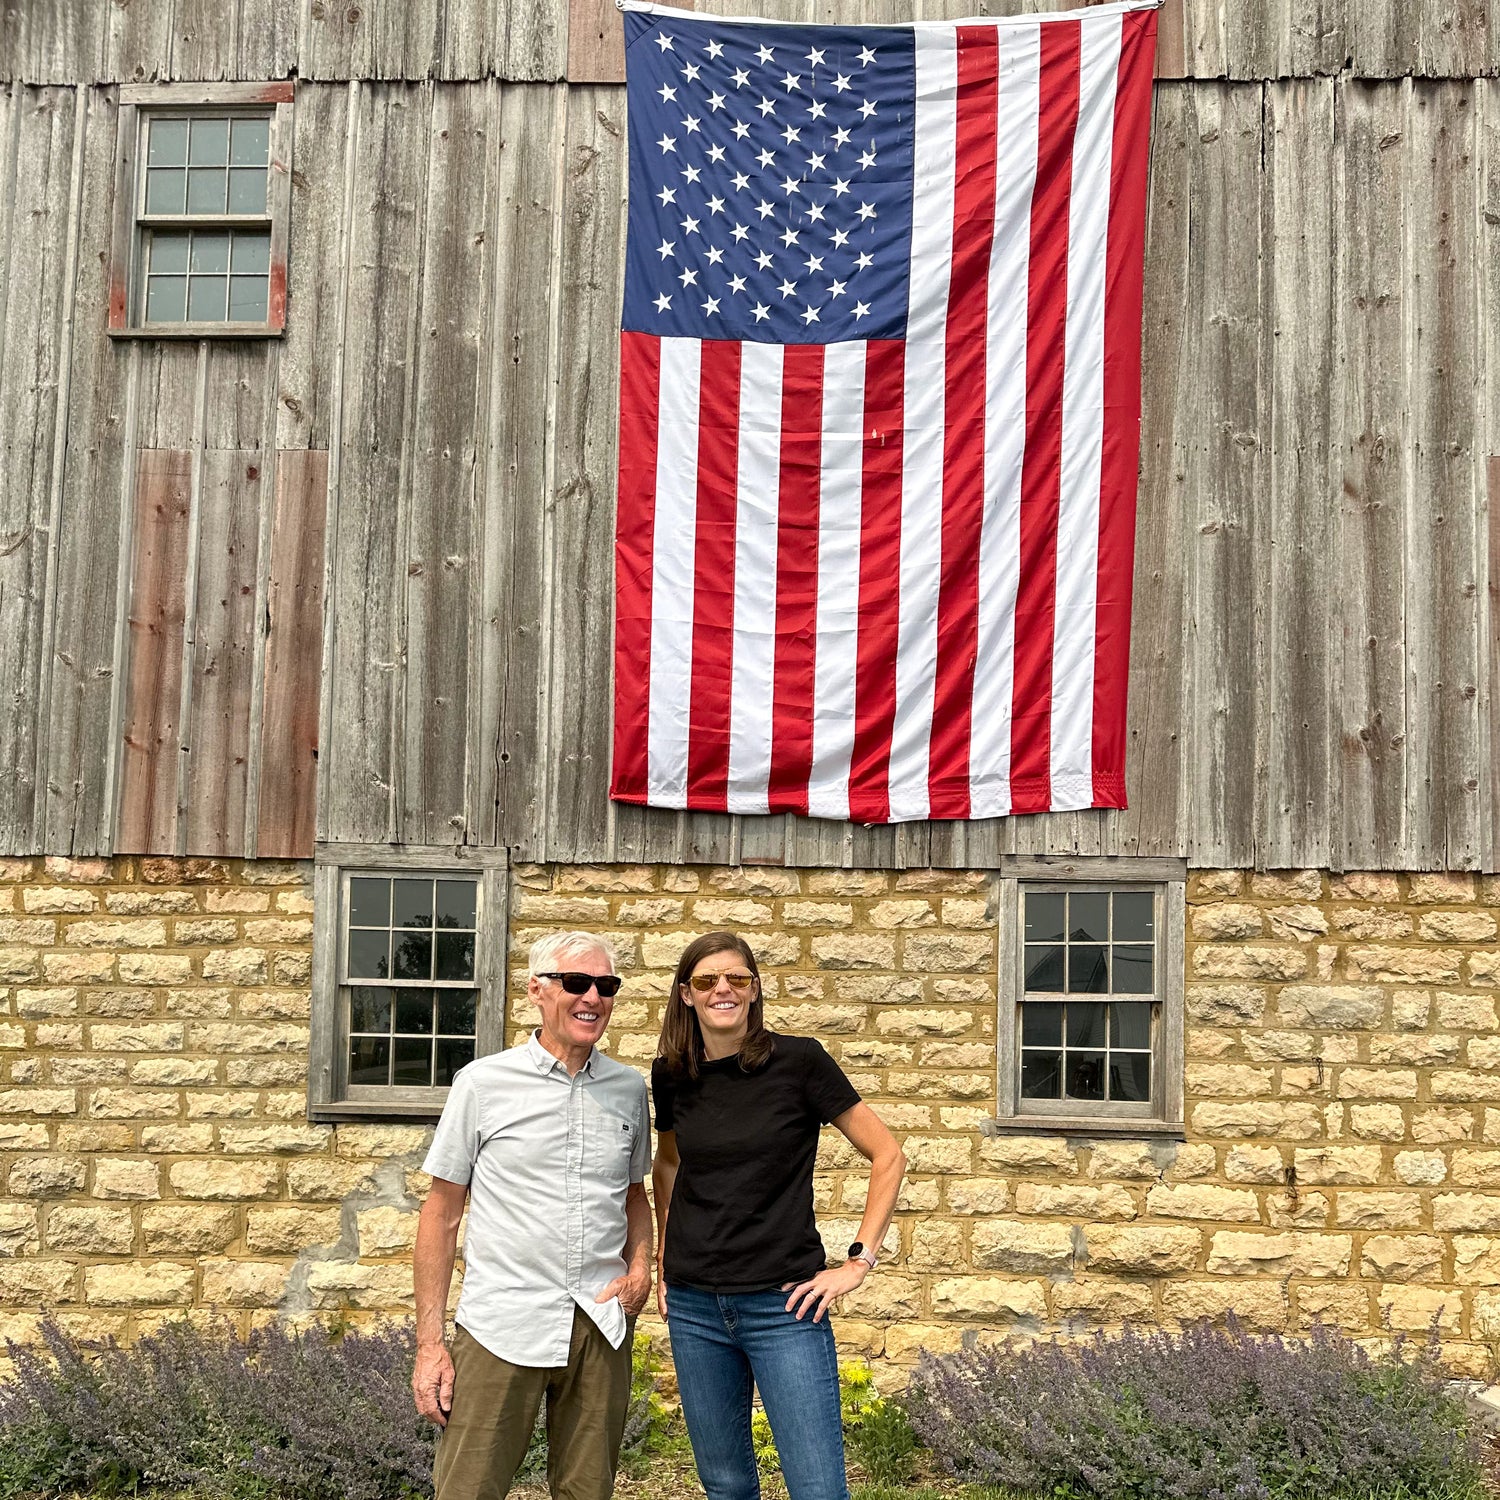 Blackberry Ridge Farms raises grass fed and finished beef in Winona, MN. Picture of Erin Gervais and Will Oberton, owners of Blackberry Ridge.